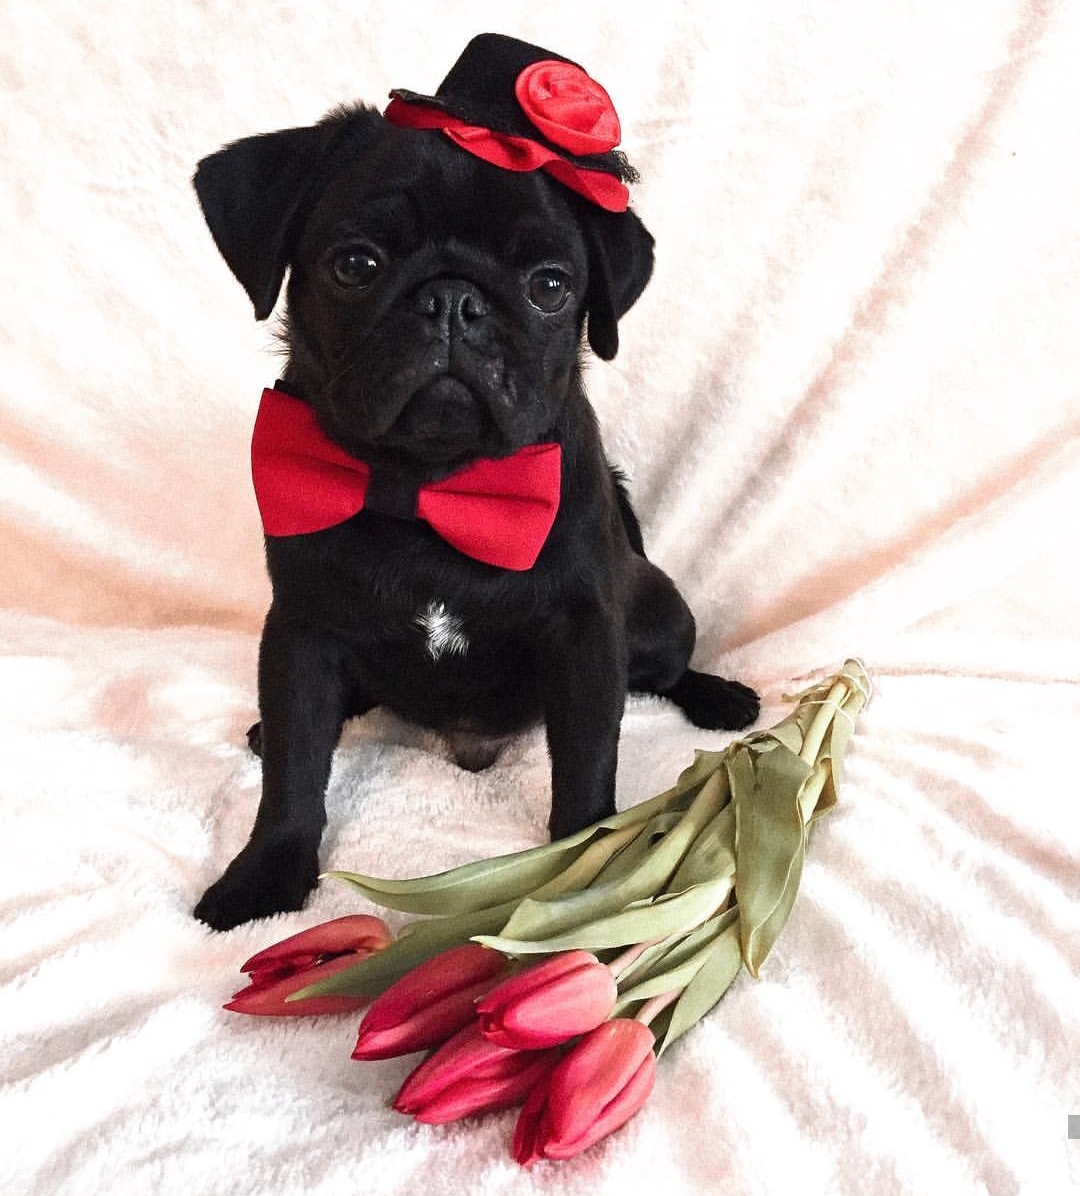 black pug wearing a red bow tie and black hat with red flowers while sitting on the blanket behind the tulip flowers